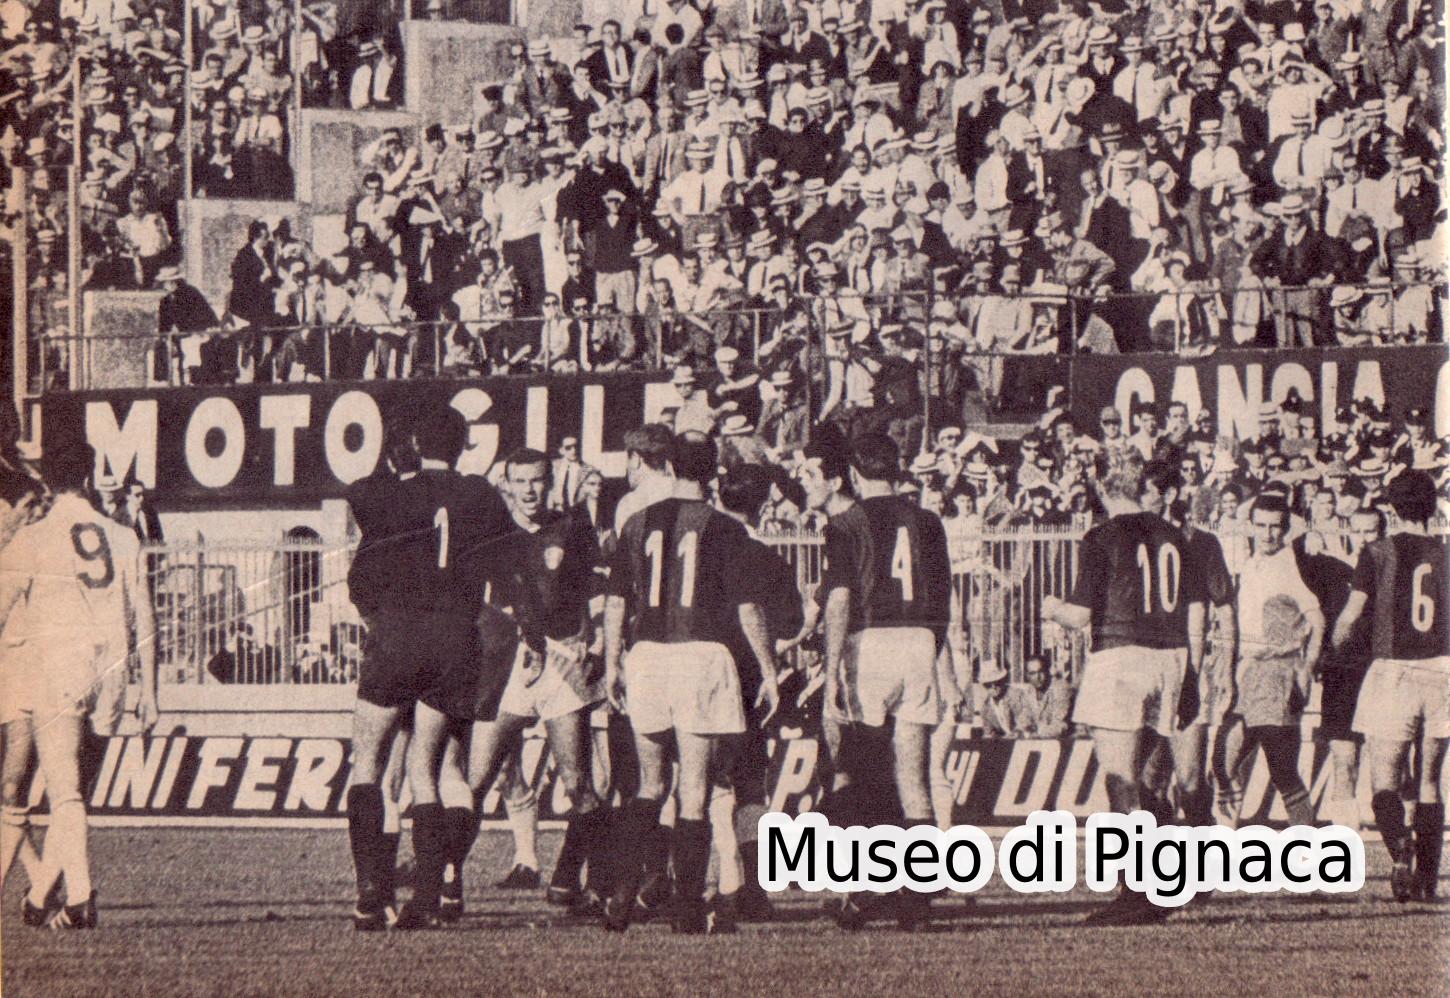 1964-65 Bologna Anderlecht - Nervosismo in campo